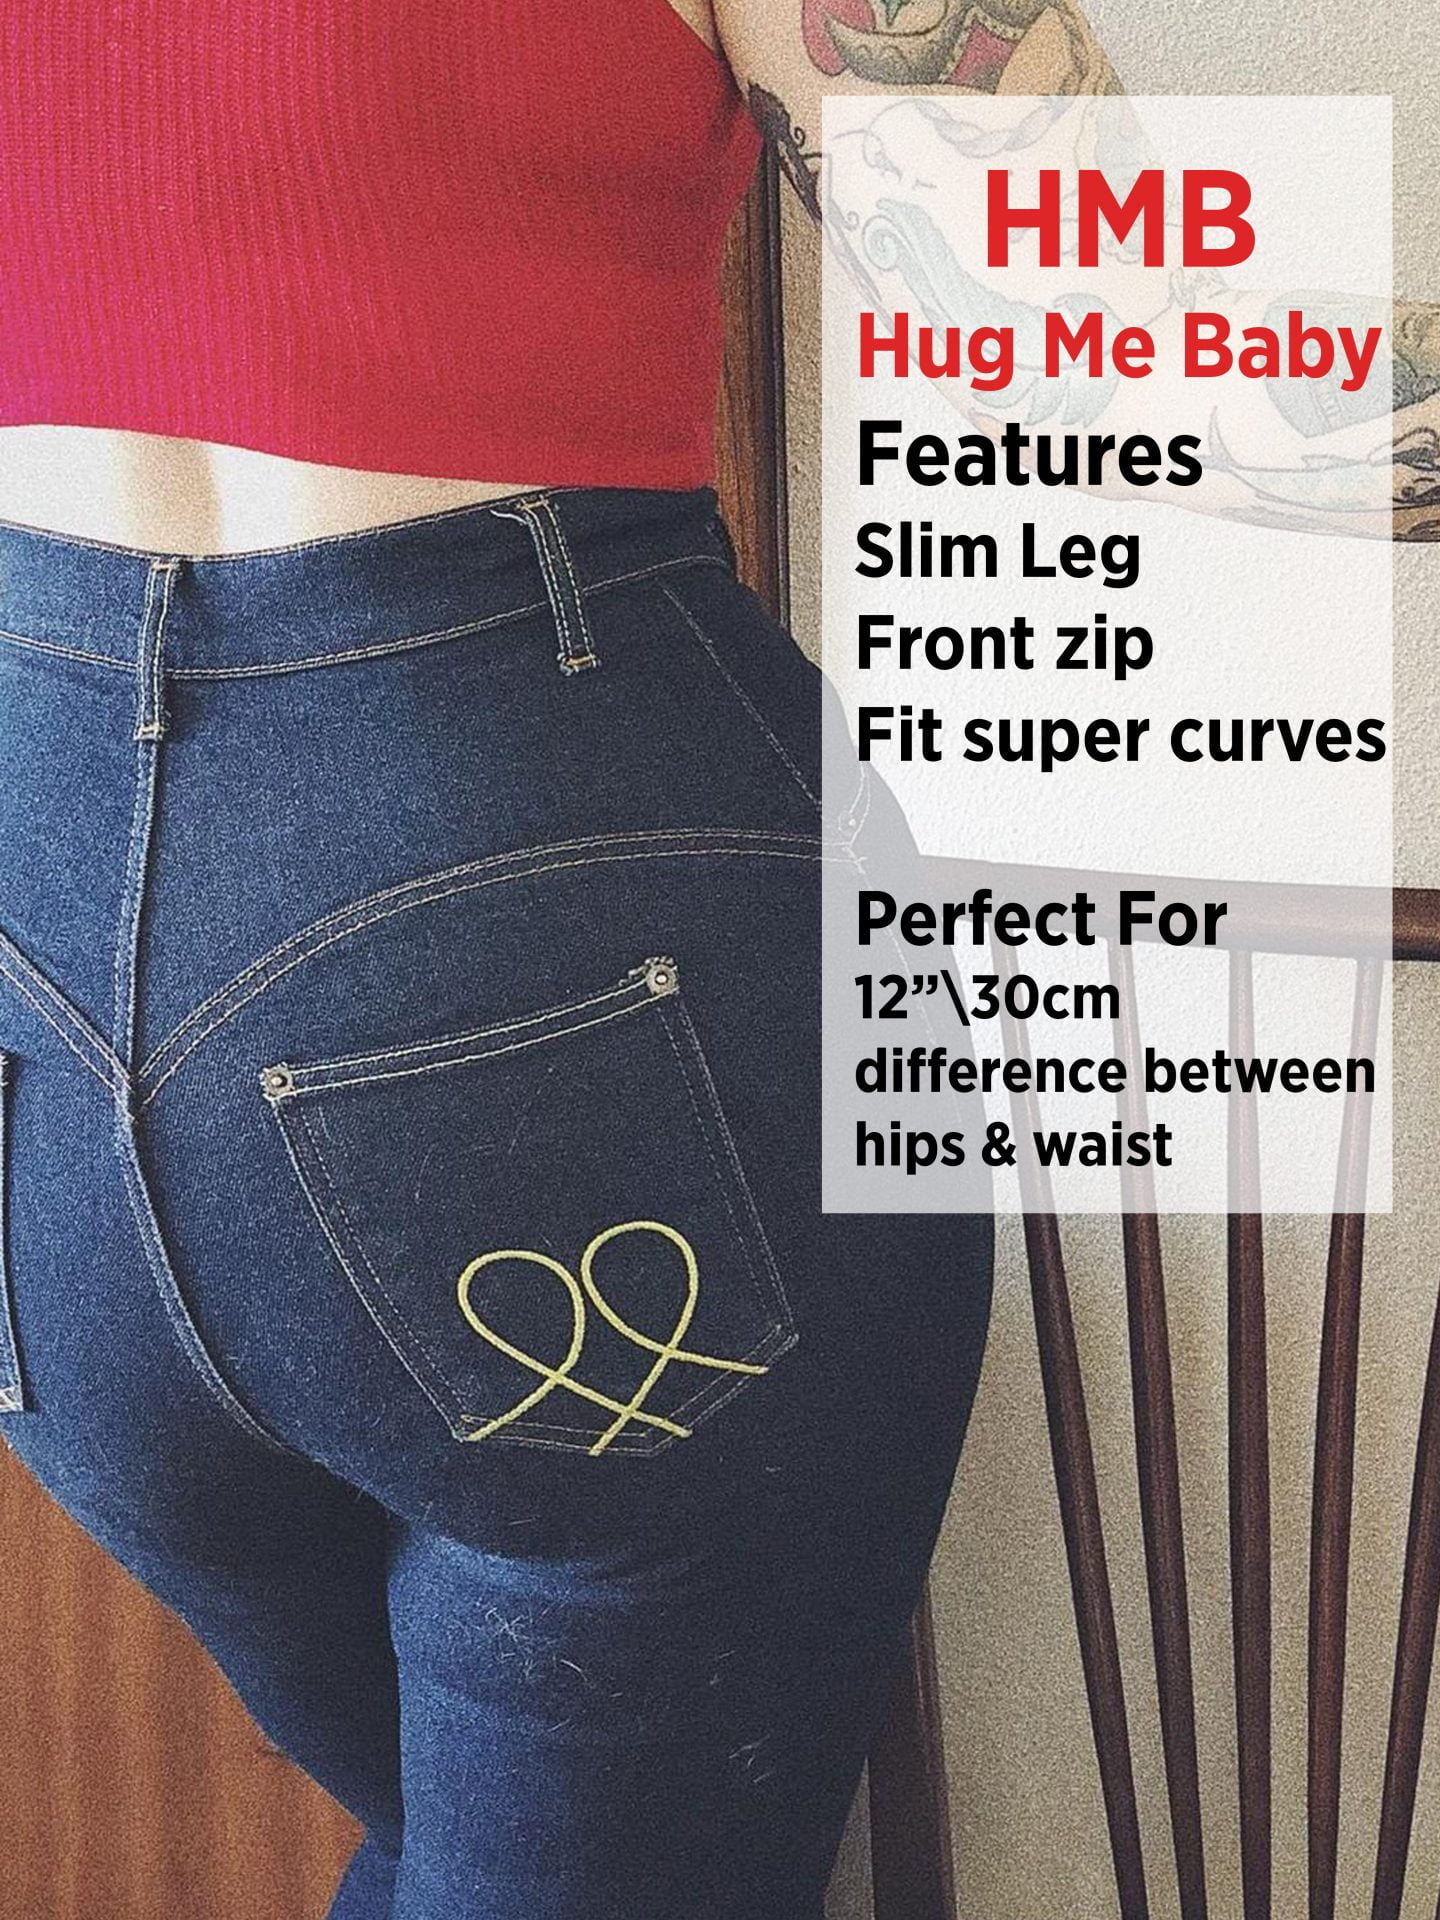 Jeans cut guide HMB | High Waist Jeans - Which style and what size?